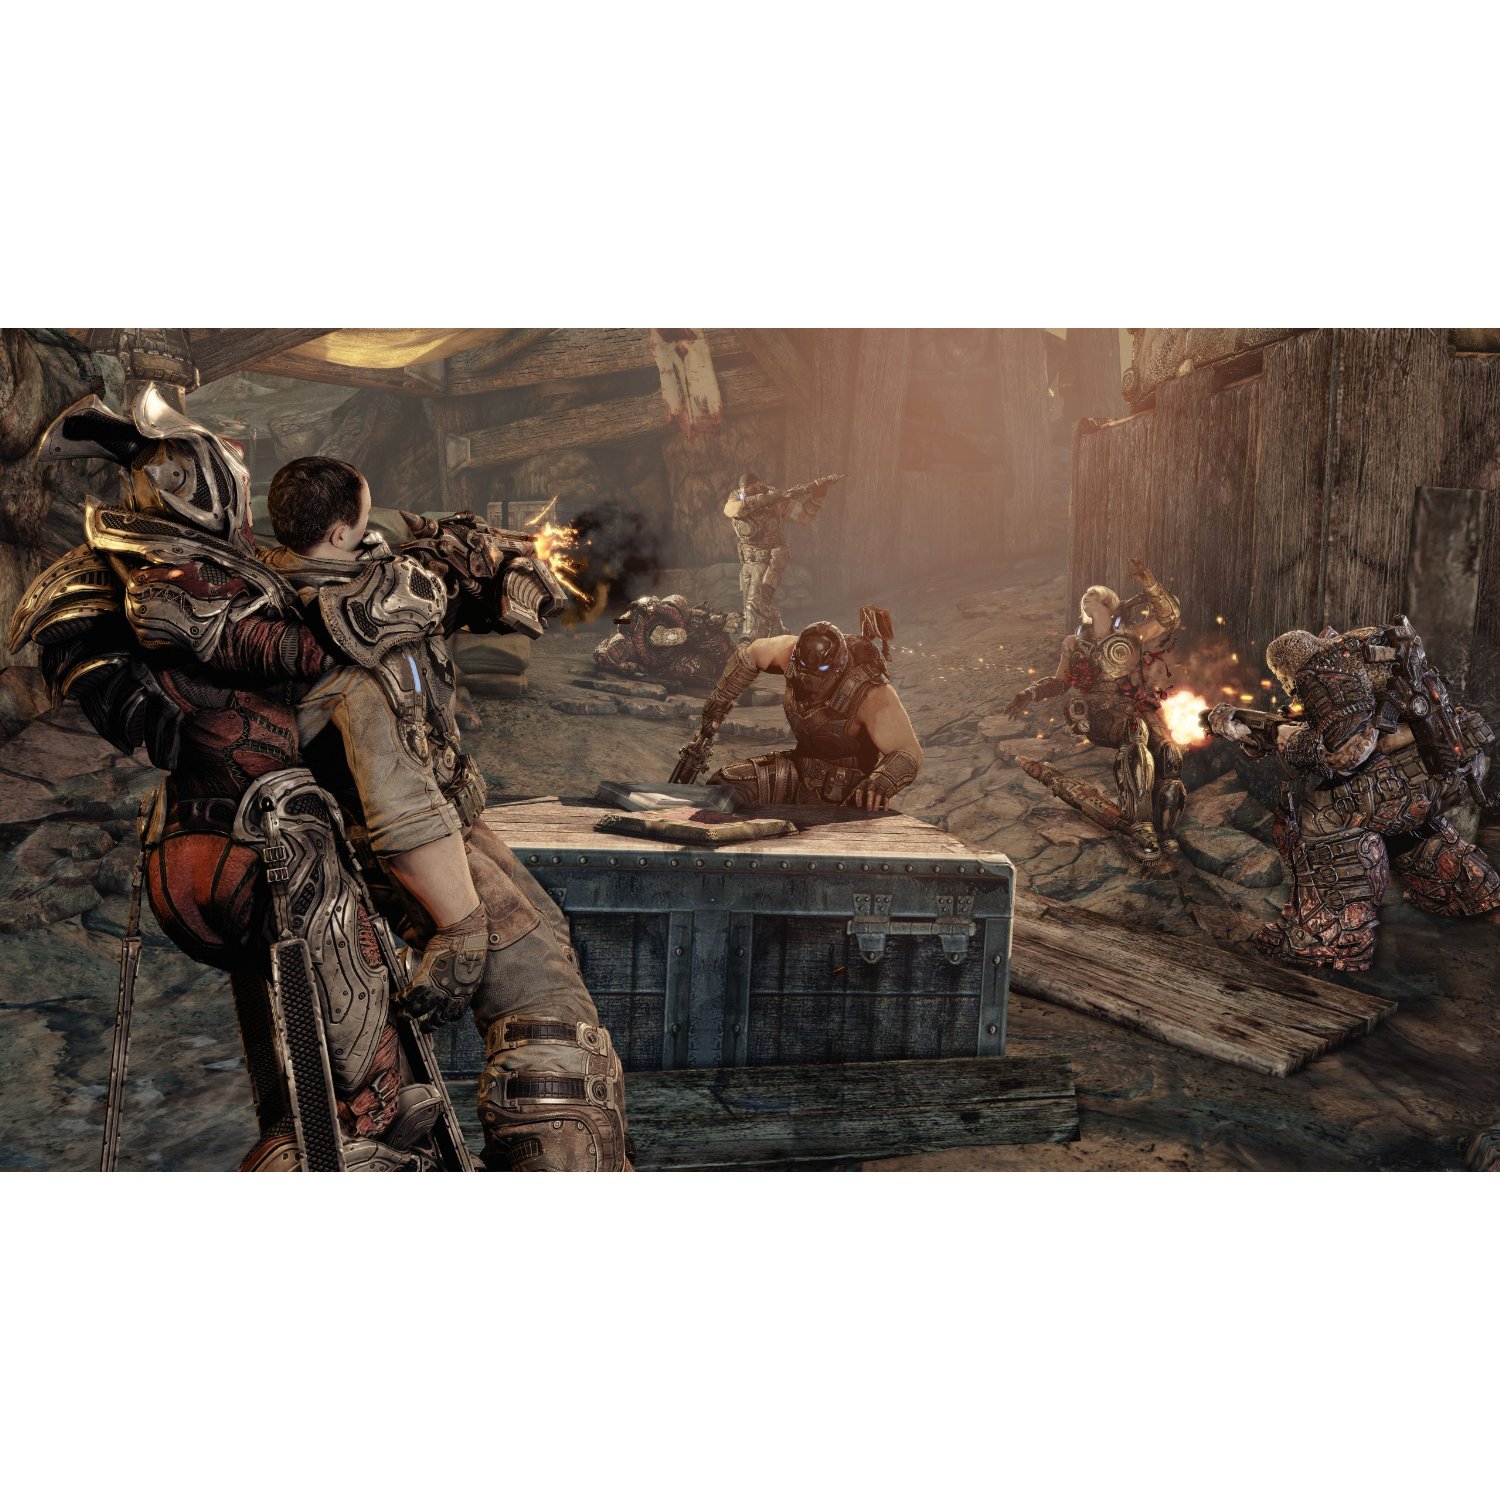 http://thetechjournal.com/wp-content/uploads/images/1108/1312638793-gears-of-war-3-game-for-xbox-360-5.jpg